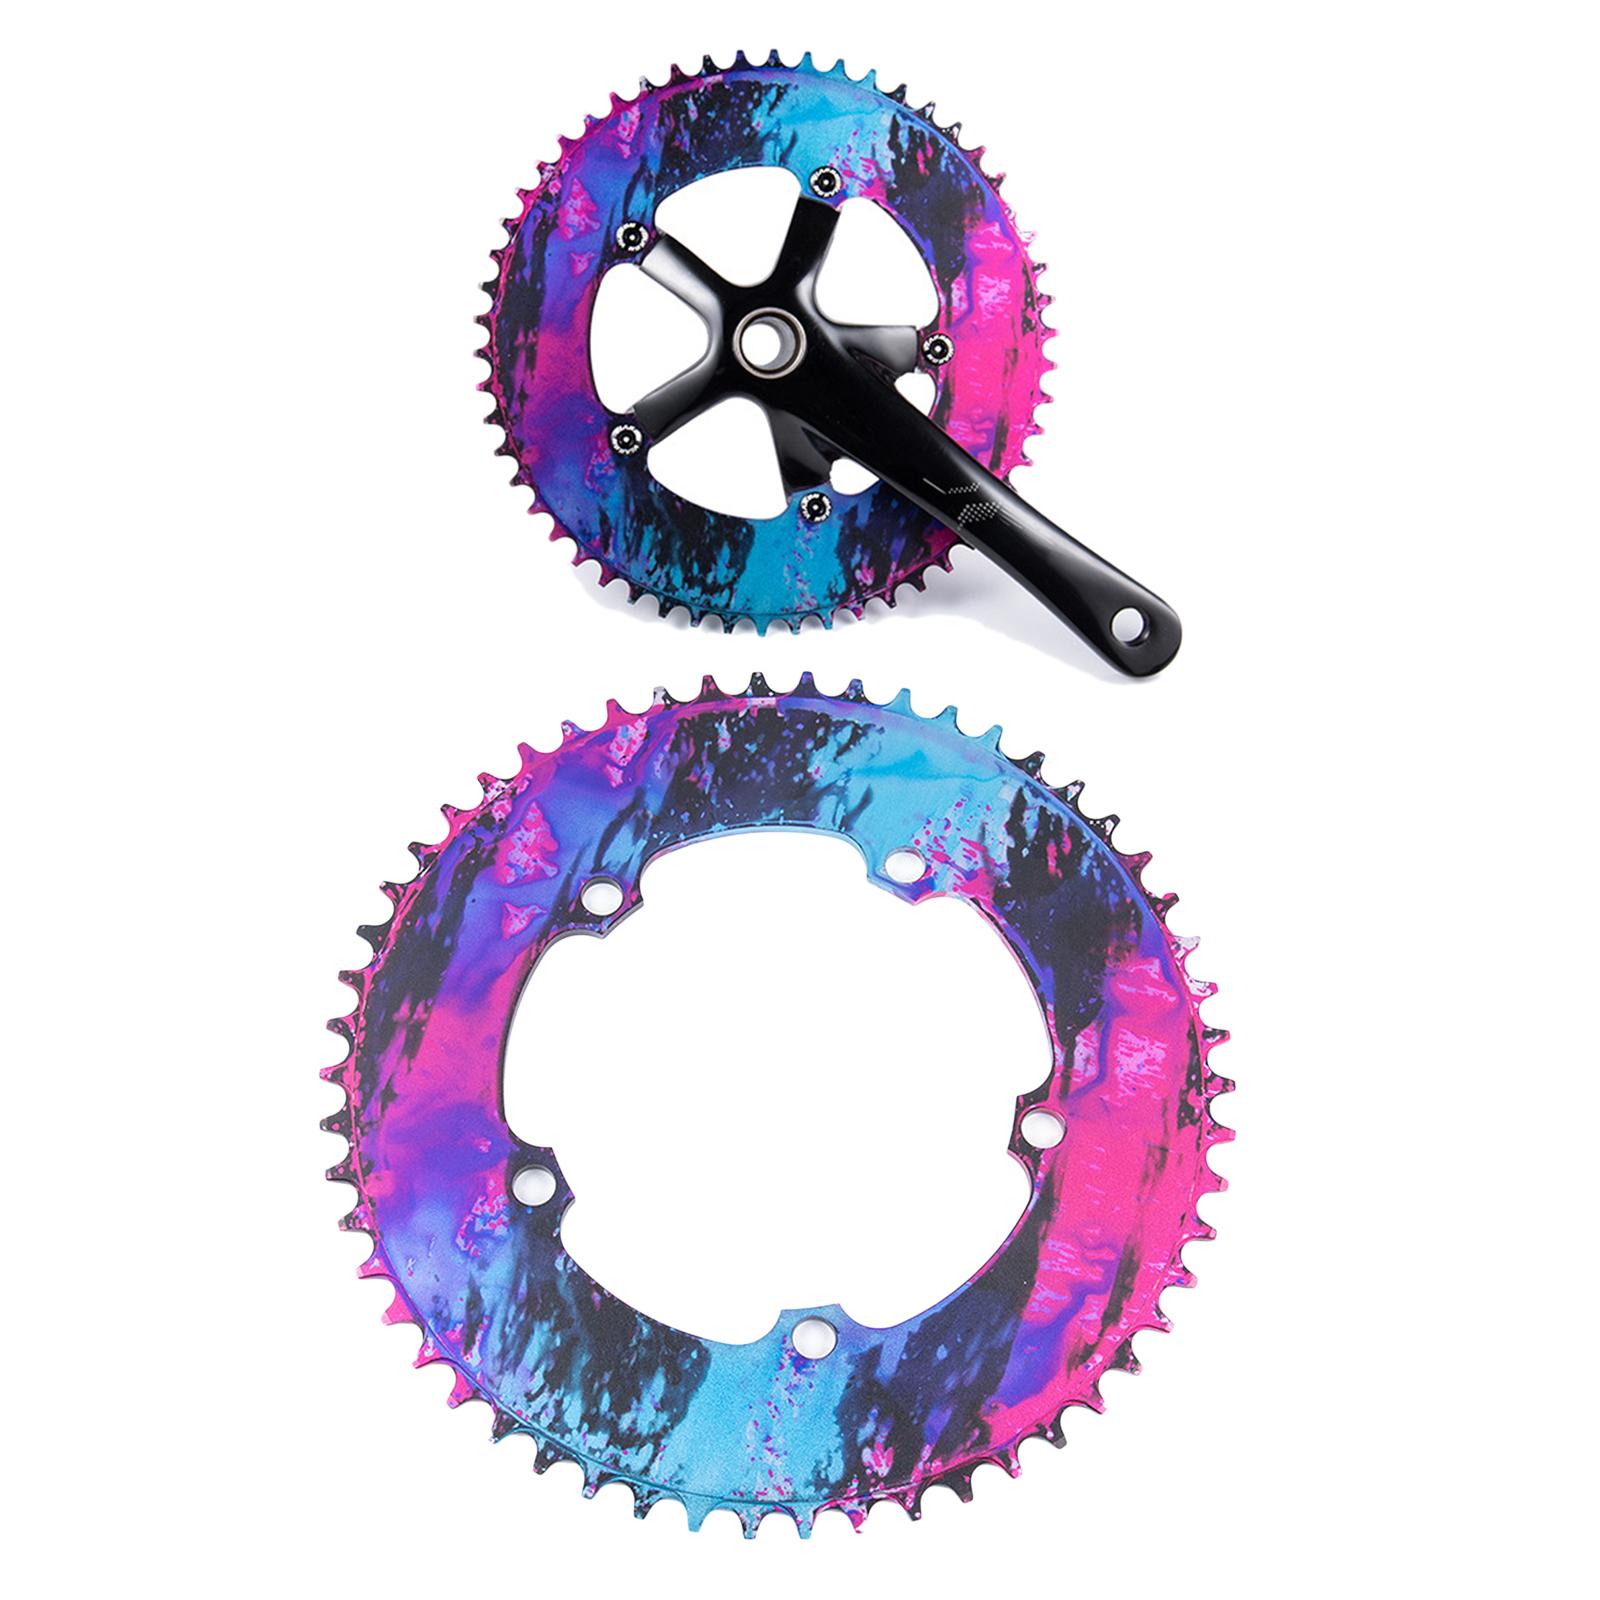 Deluxe Bike Chainring Solid Bicycle Narrow Wide BCD130 Chainwheel Fushia 54T